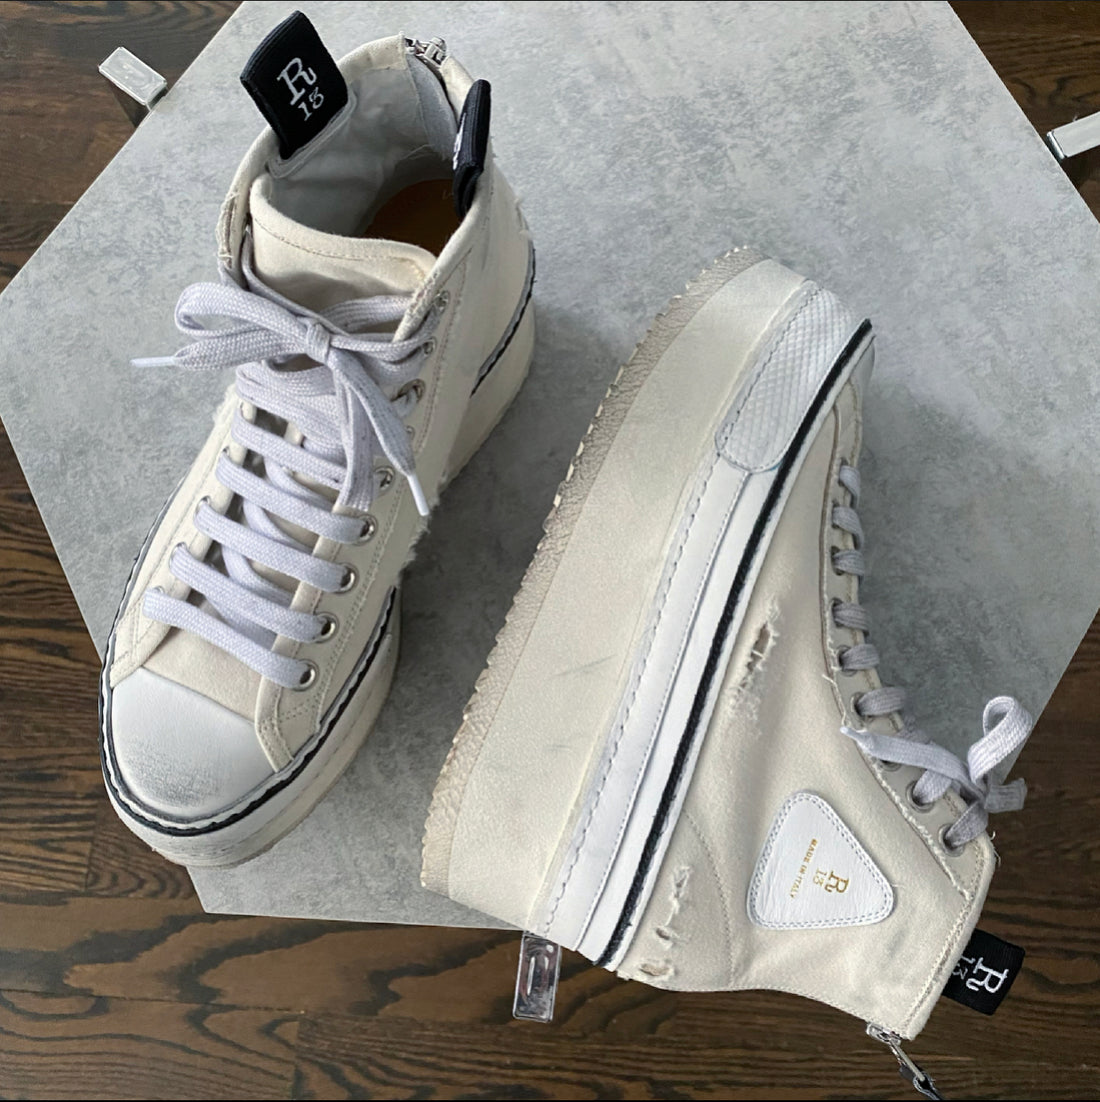 R13 White Distressed Platform High-Top Sneakers - USA 7